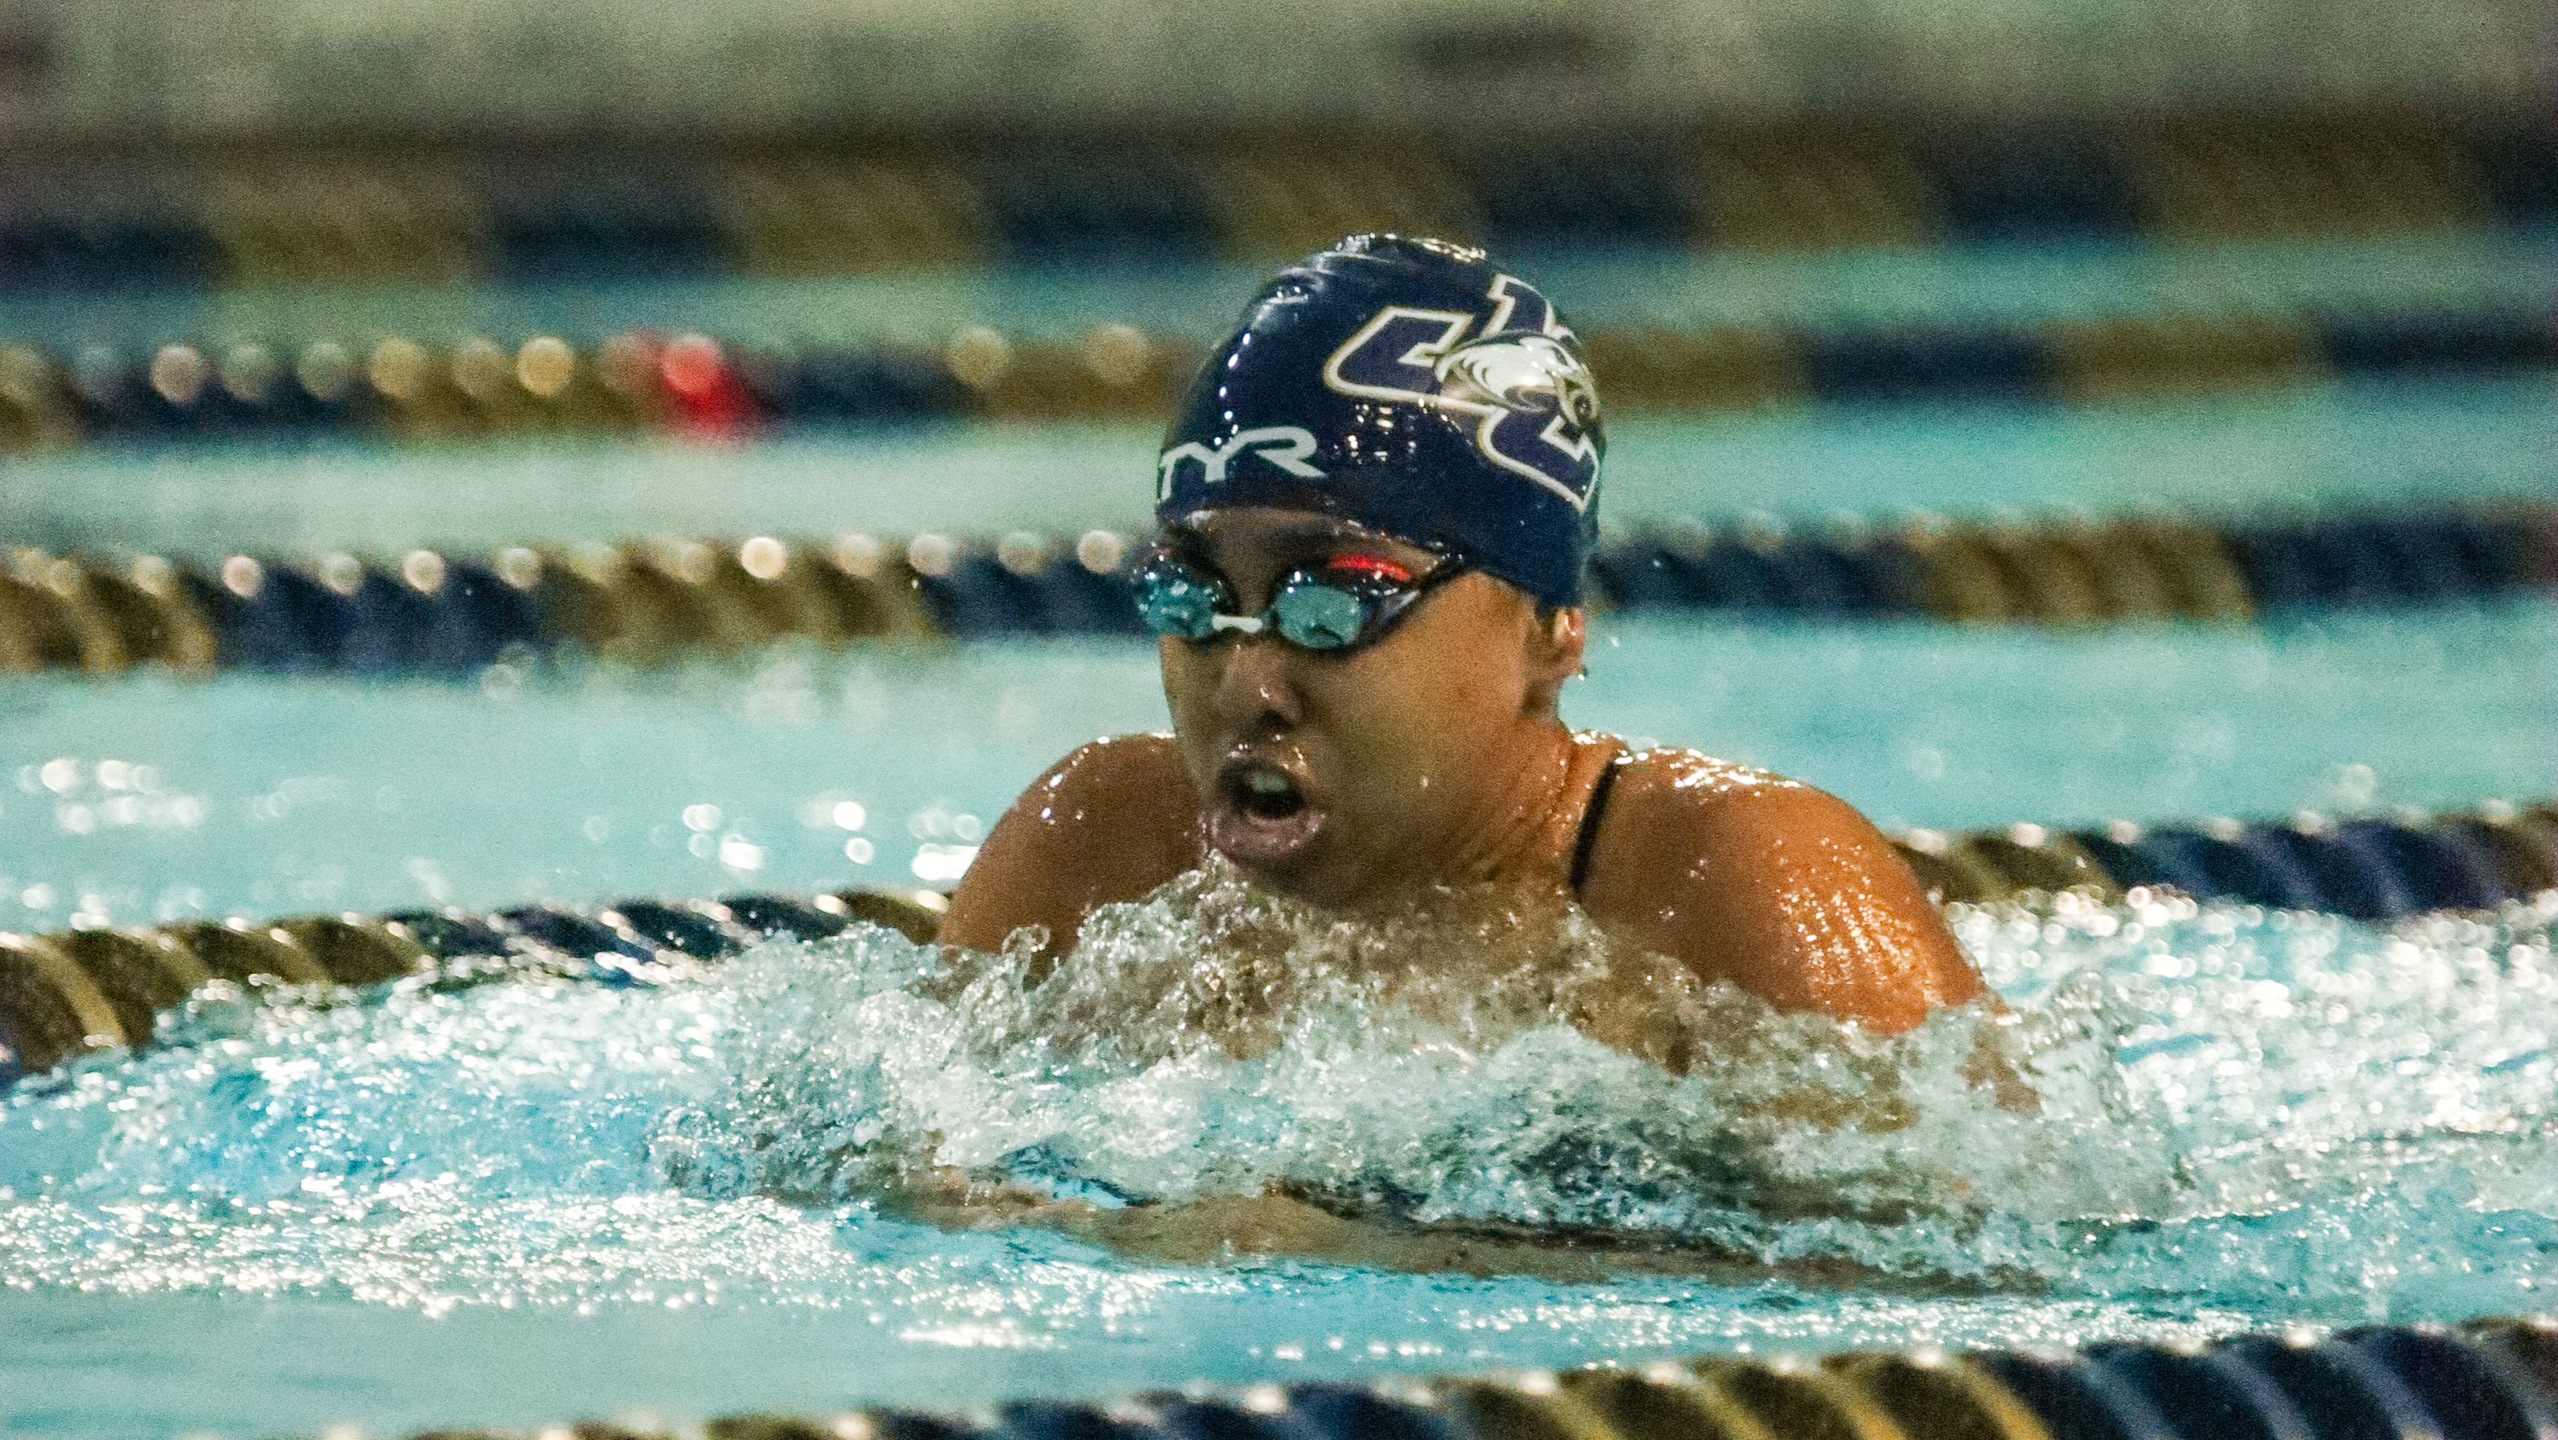 Eagles Open Landmark Swimming Championships in Relay Competition